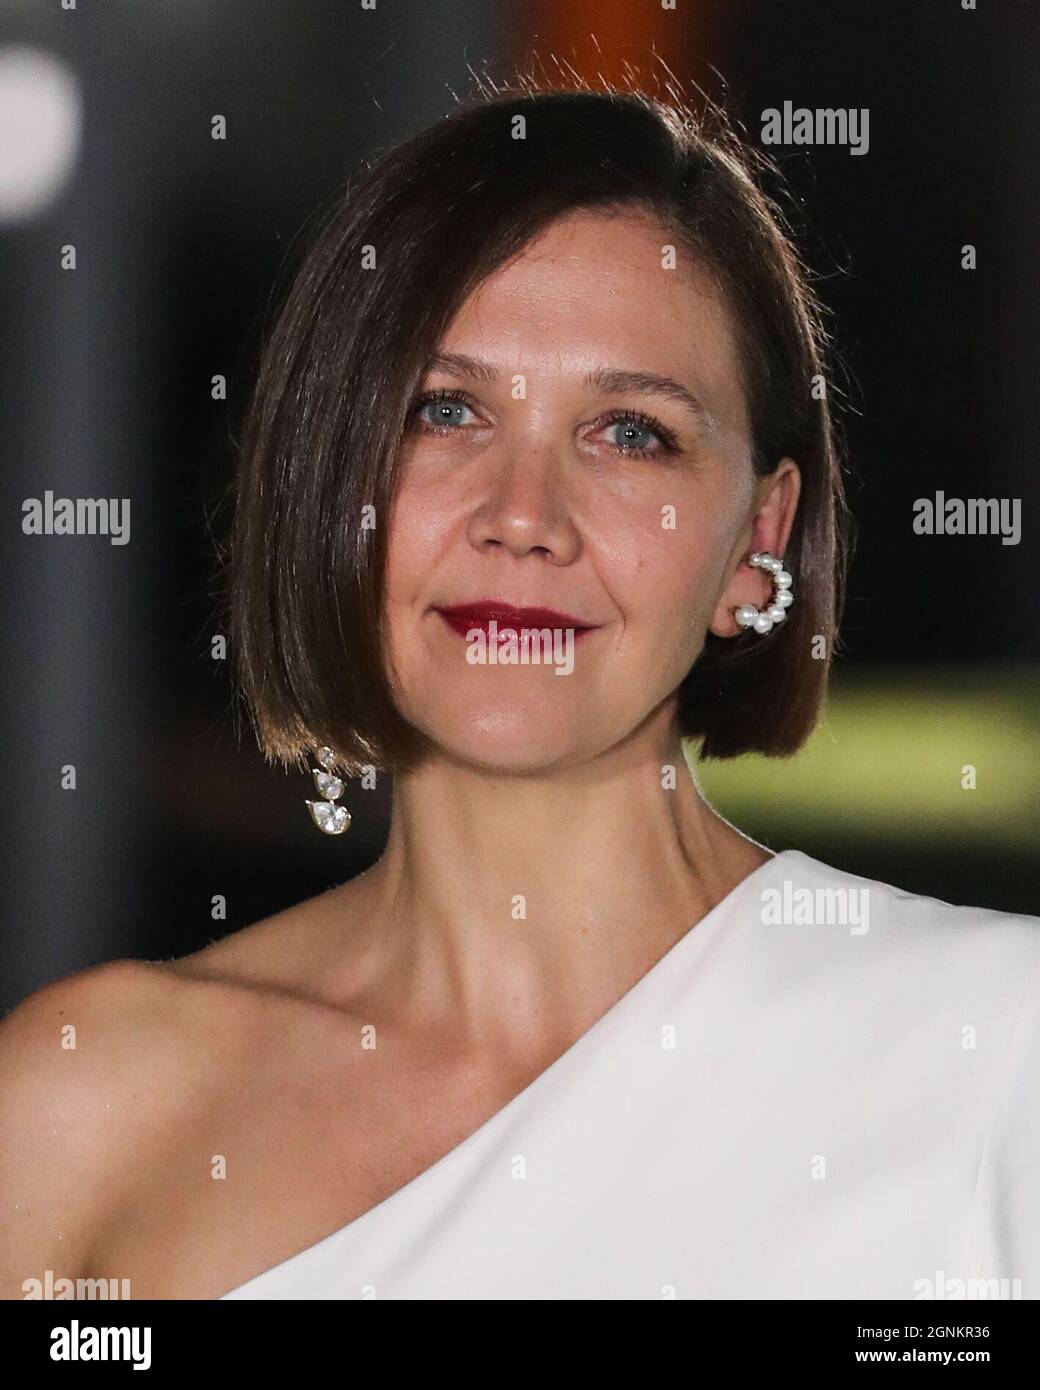 LOS ANGELES, CALIFORNIA, USA - SEPTEMBER 25: Actress Maggie Gyllenhaal arrives at the Academy Museum of Motion Pictures Opening Gala held at the Academy Museum of Motion Pictures on September 25, 2021 in Los Angeles, California, United States. (Photo by Xavier Collin/Image Press Agency/Sipa USA) Stock Photo